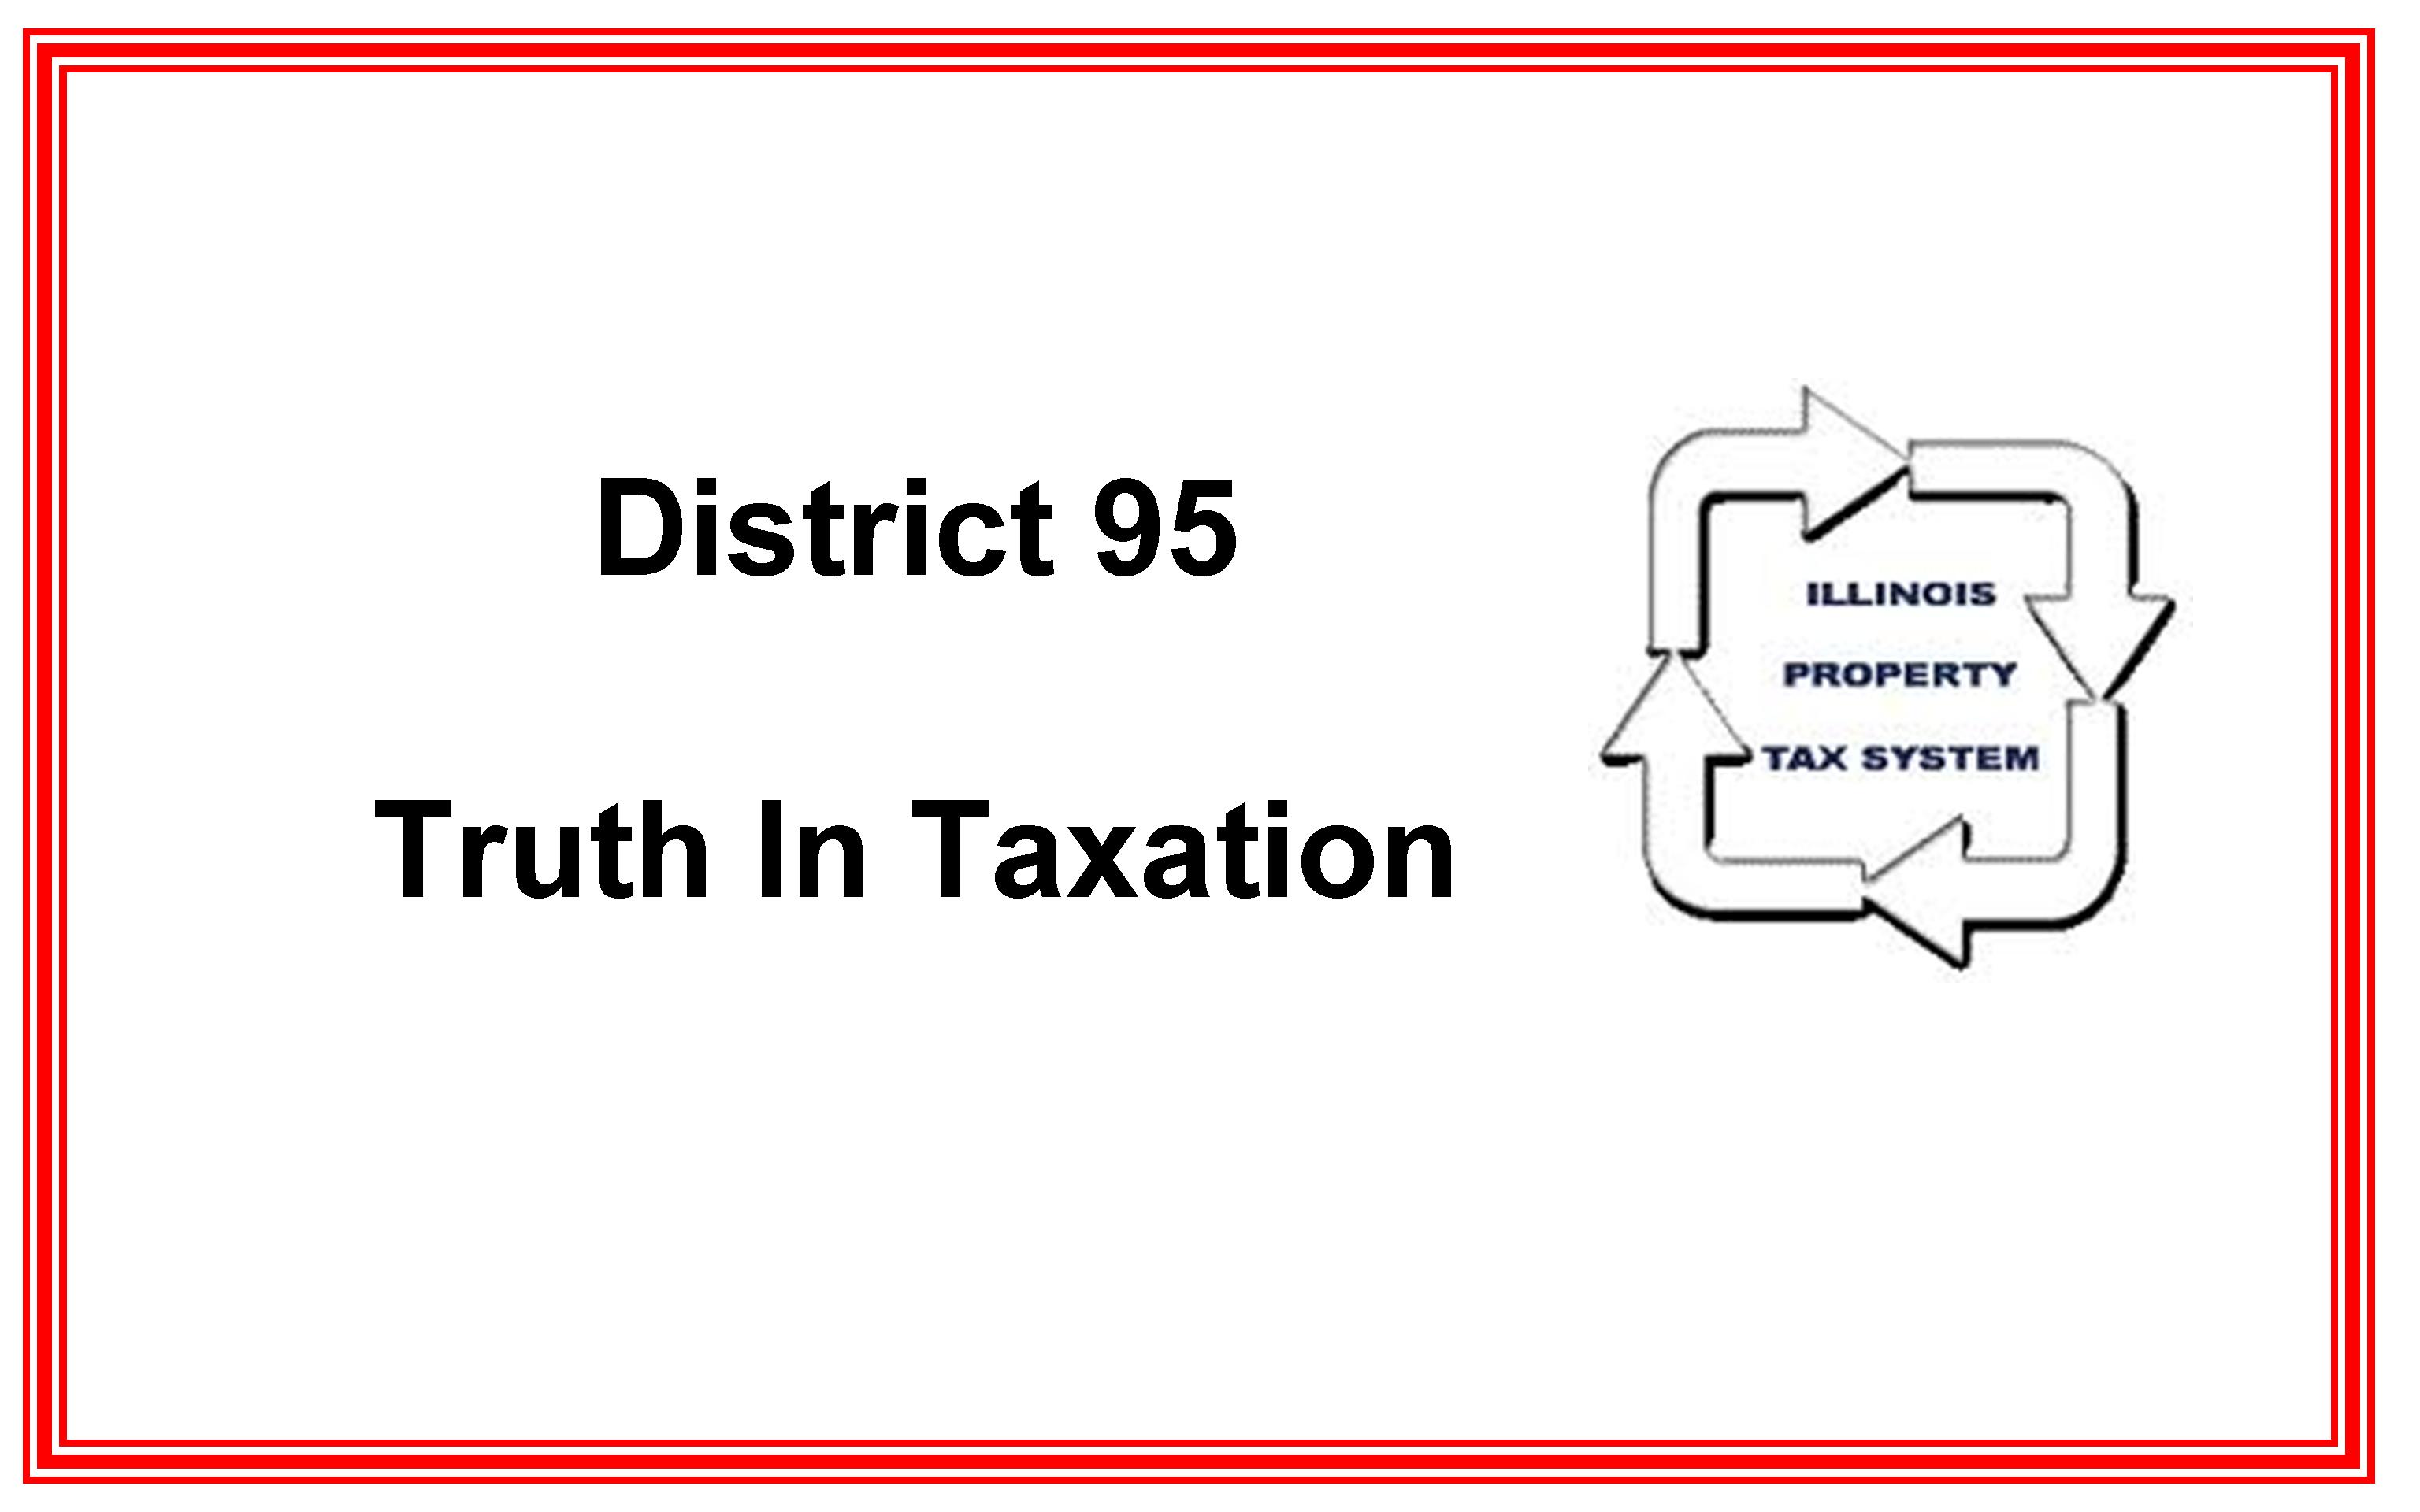 truthintaxation